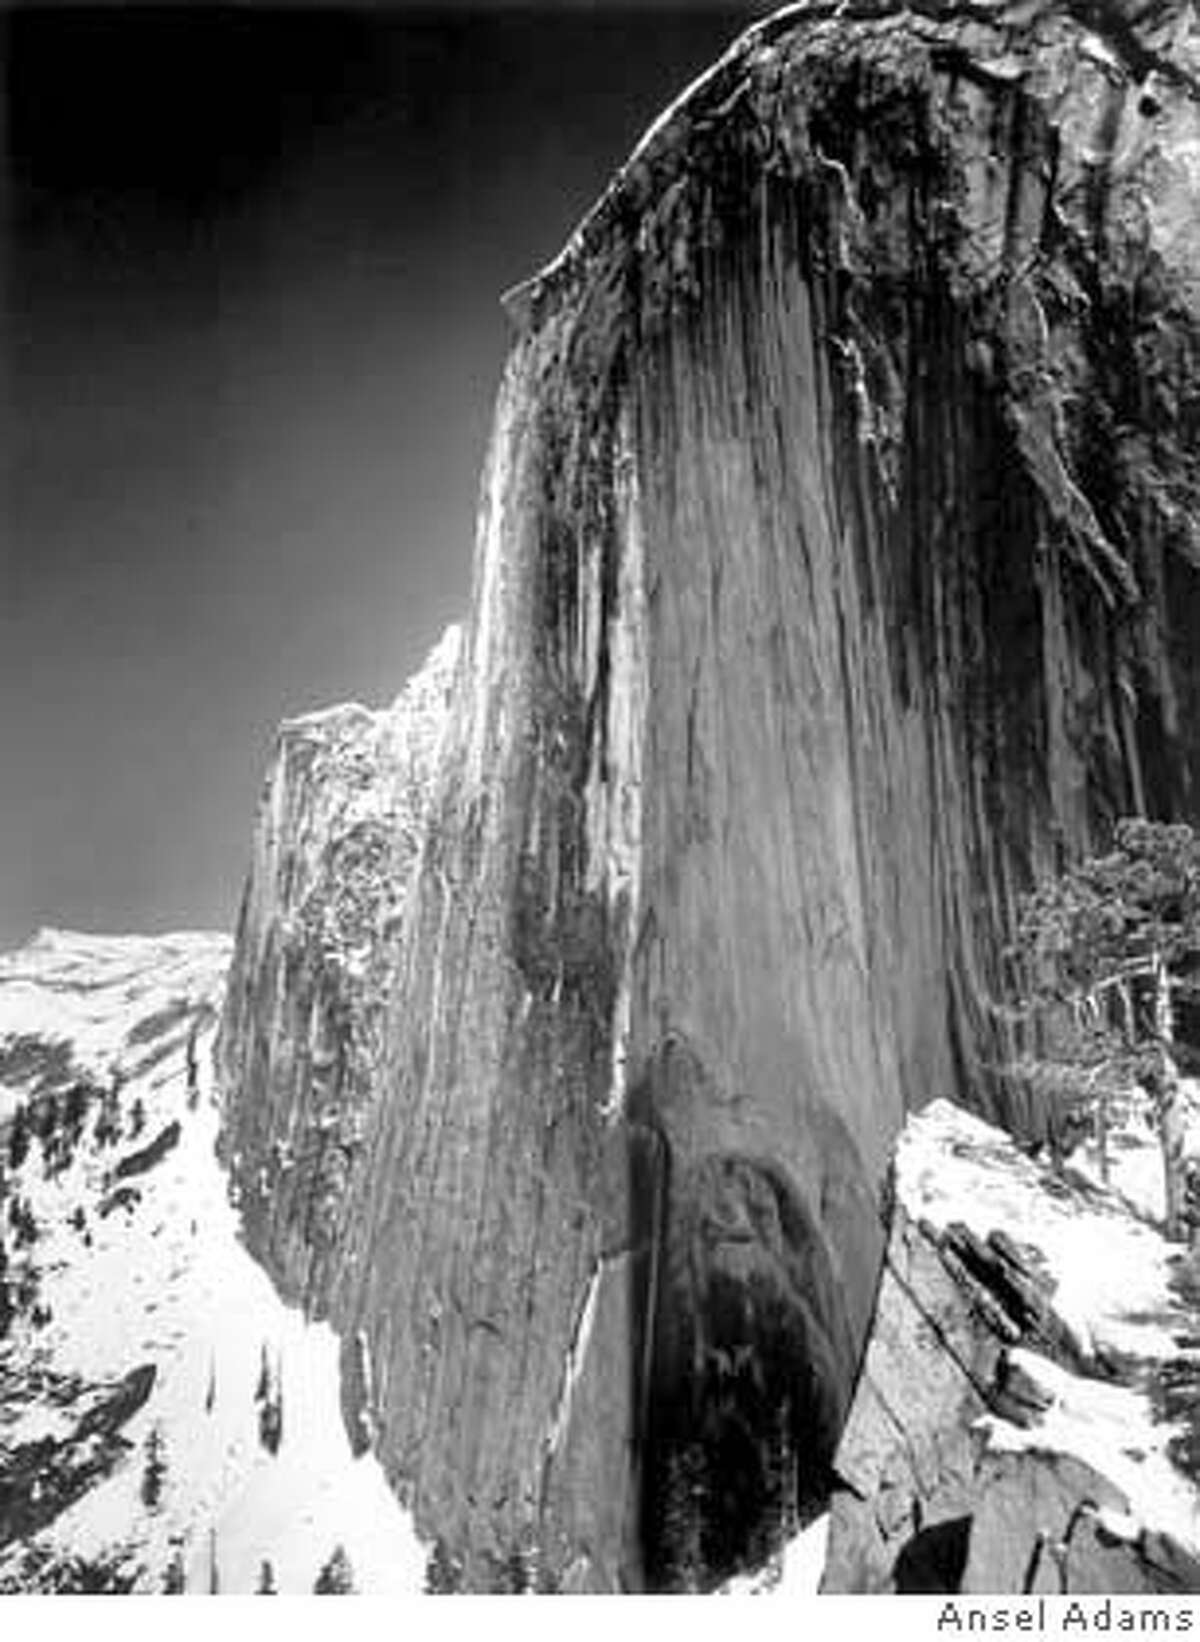 � Ansel Adam�s "The Face of Half Dome" and other vintage prints are part of this exhibit that showcases the John Muir Trail. Credit: Ansel Adams